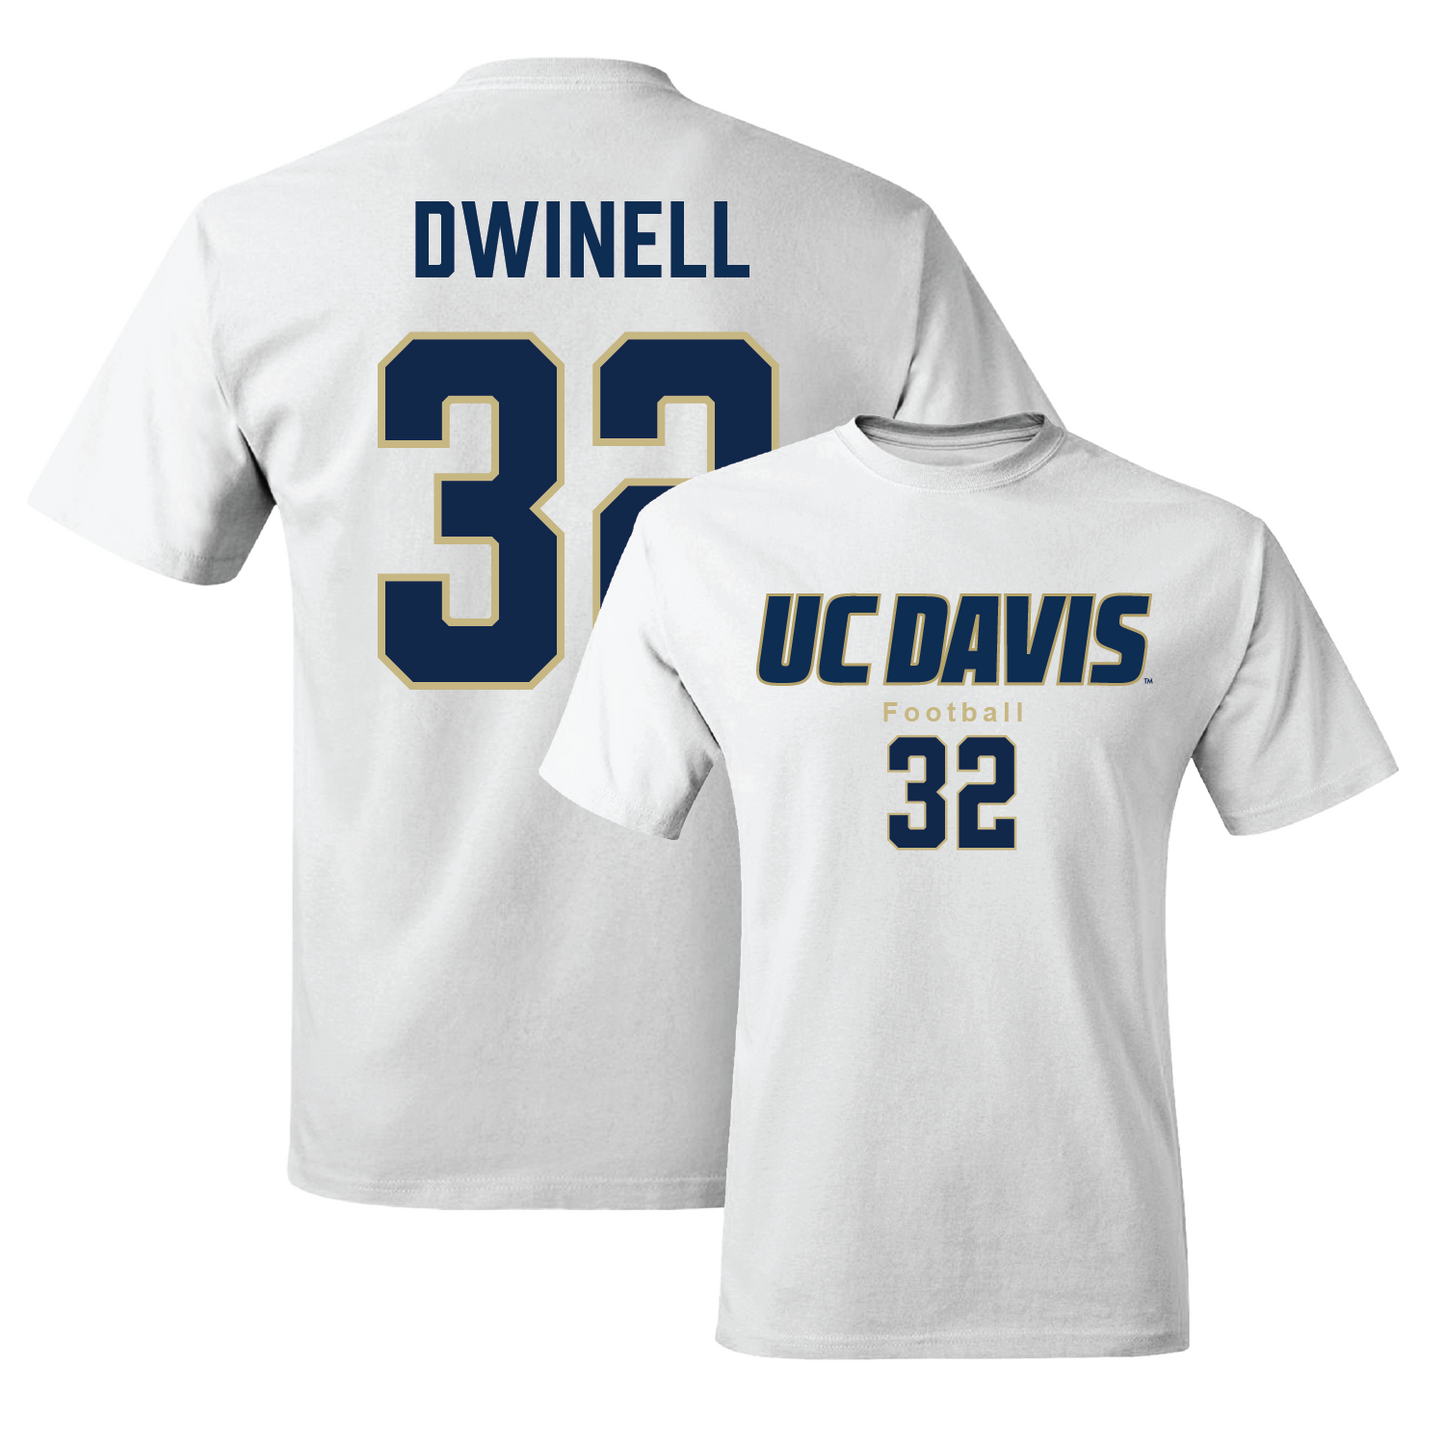 White Football Classic Comfort Colors Tee 3 Youth Small / Justin Dwinell | #32